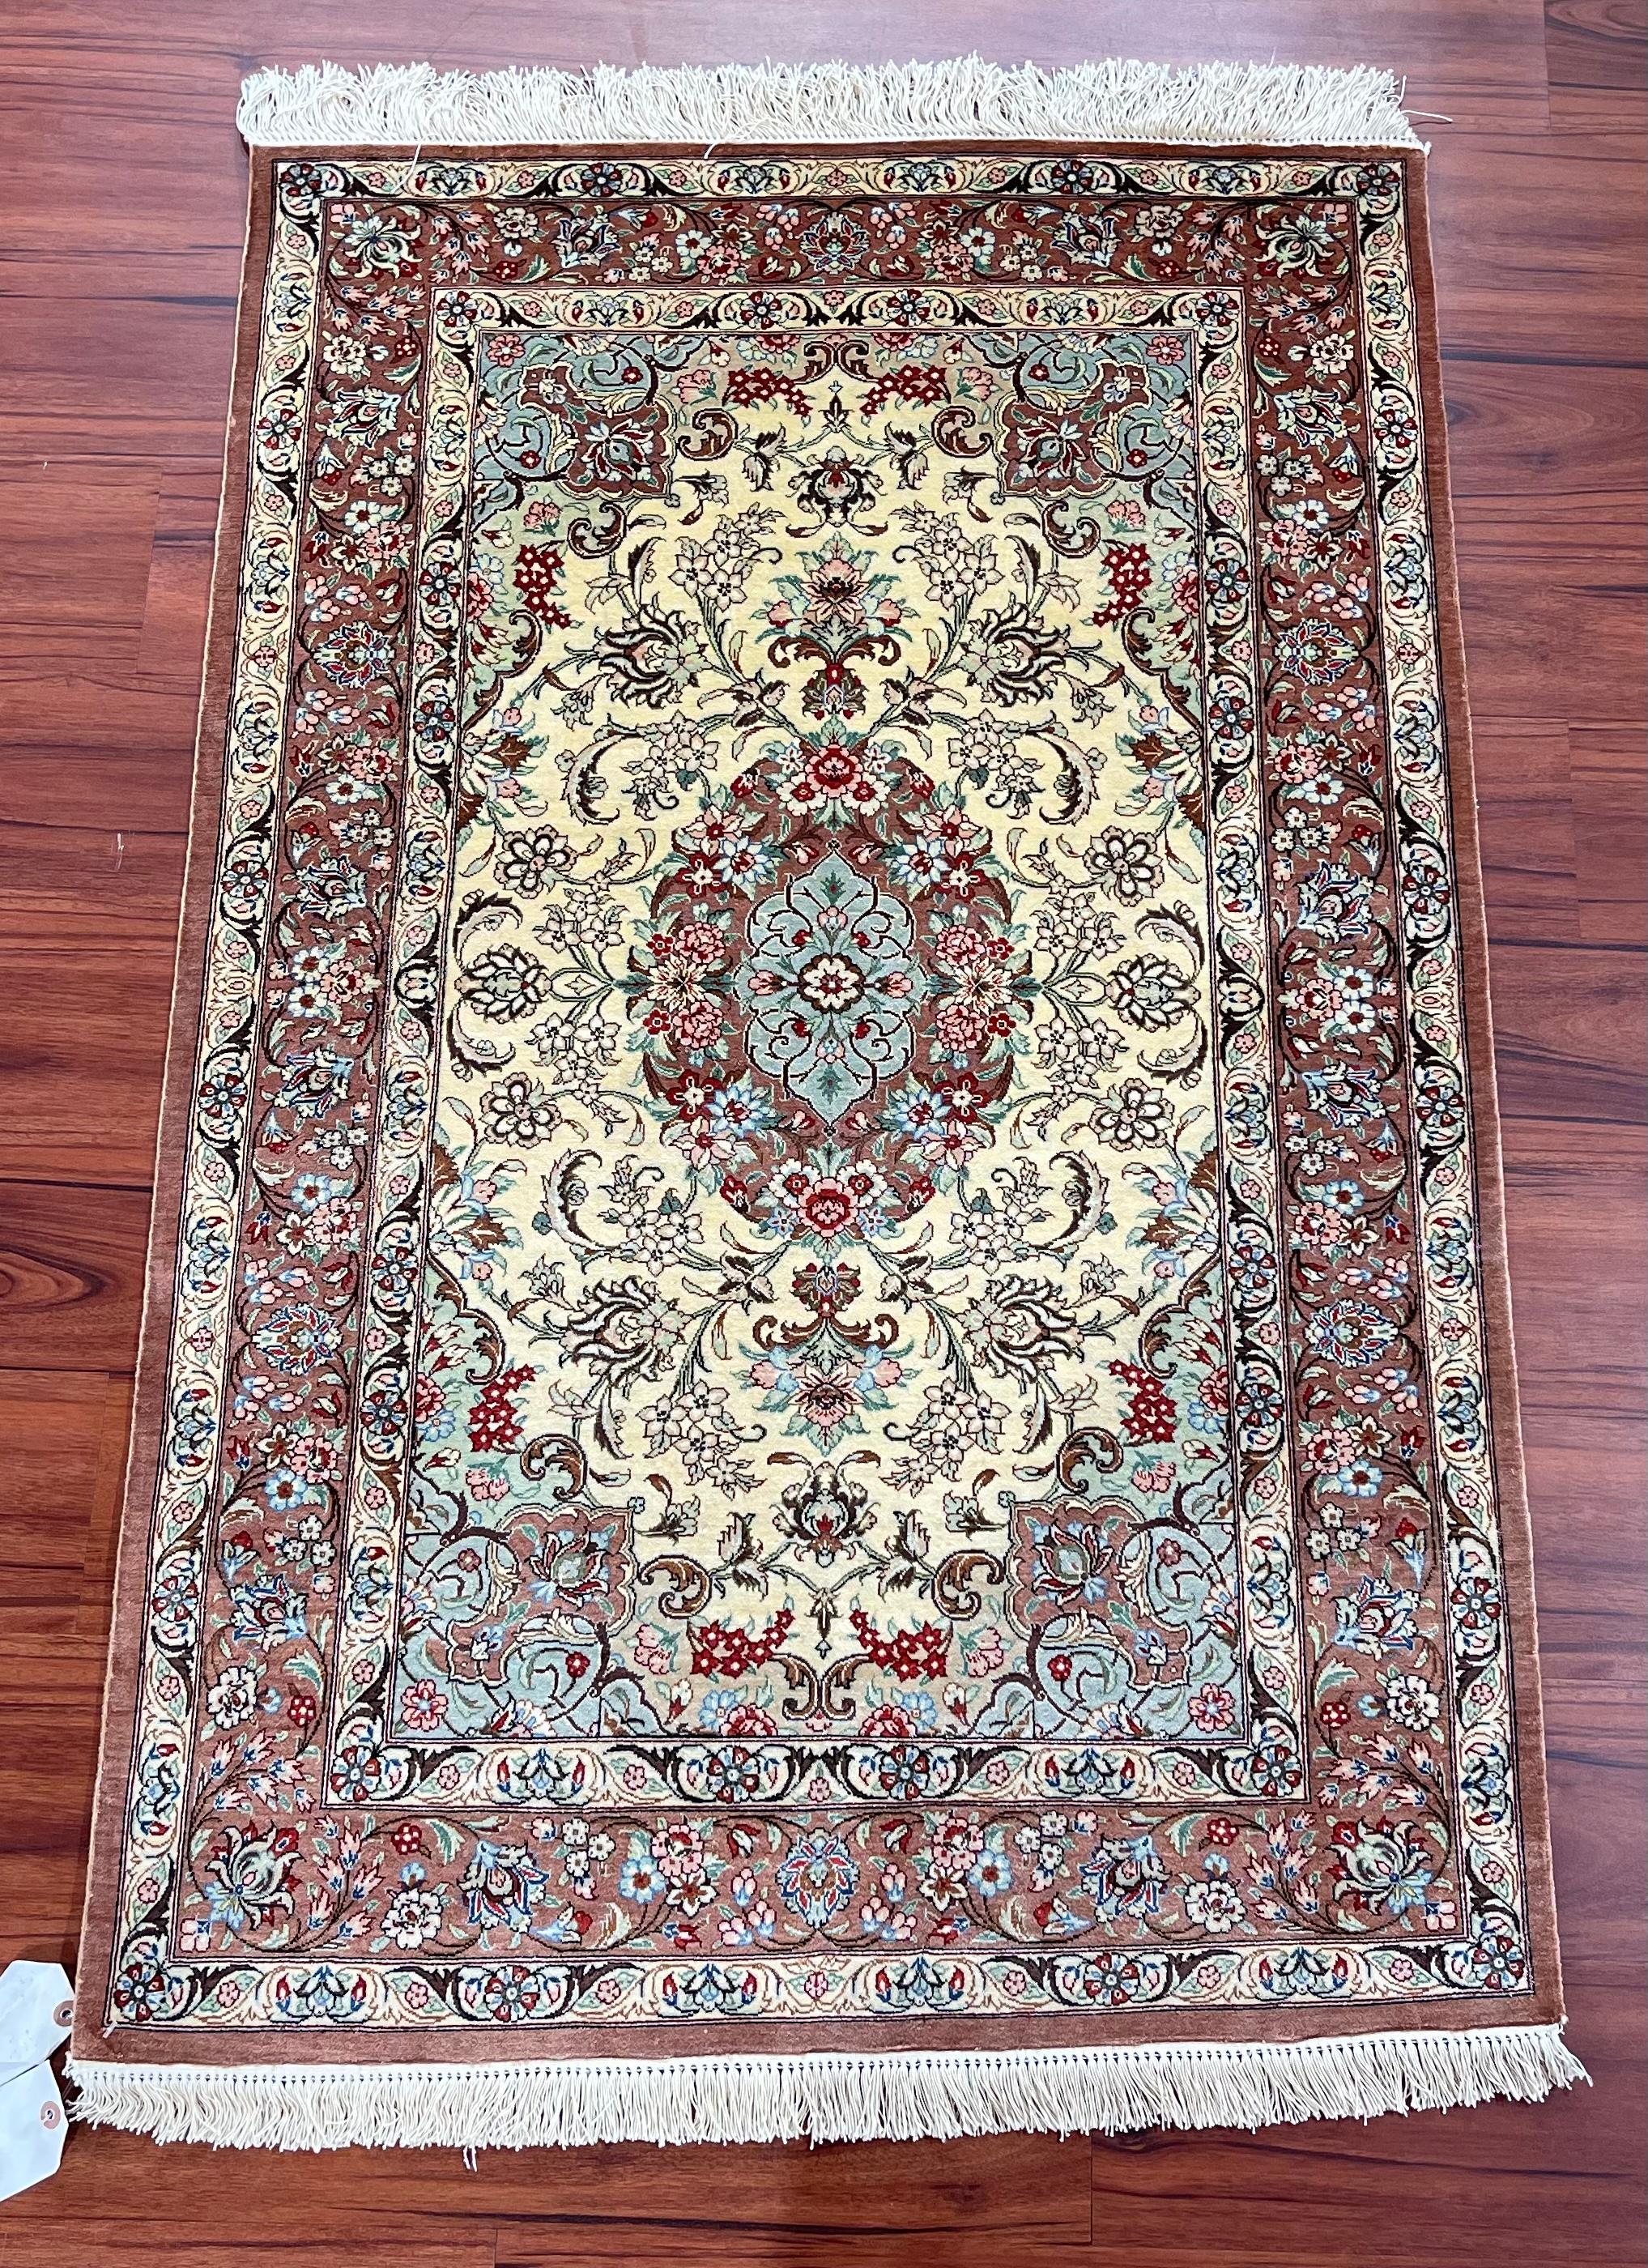 A stunning 100% Silk Persian Qum rug originated from Iran in the late 20th century. This Rug is hand-knotted and in Excellent condition.